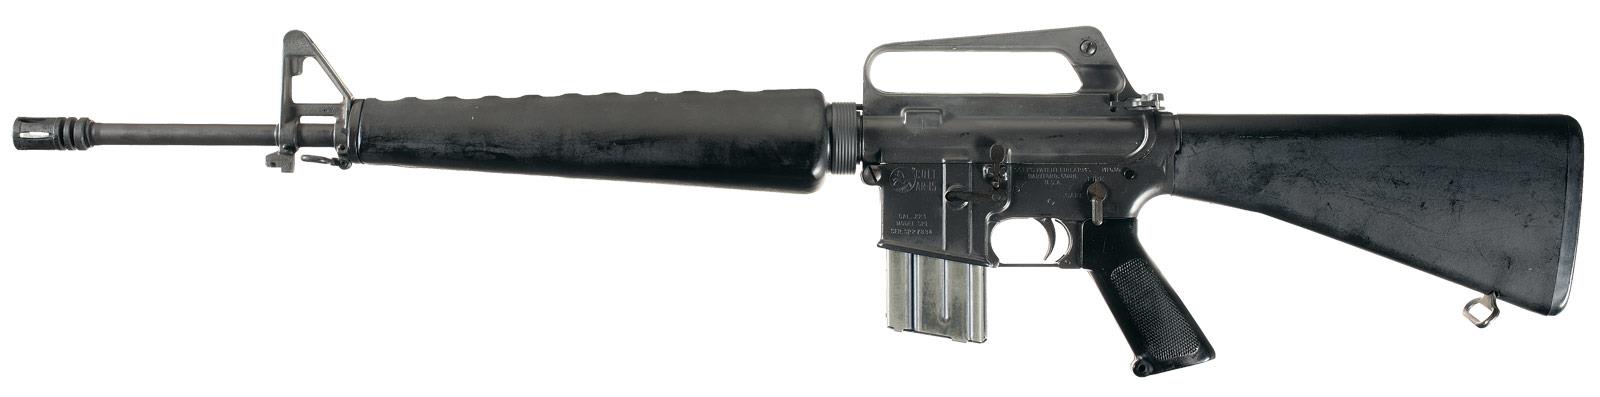 colt ar 15 post ban serial numbers